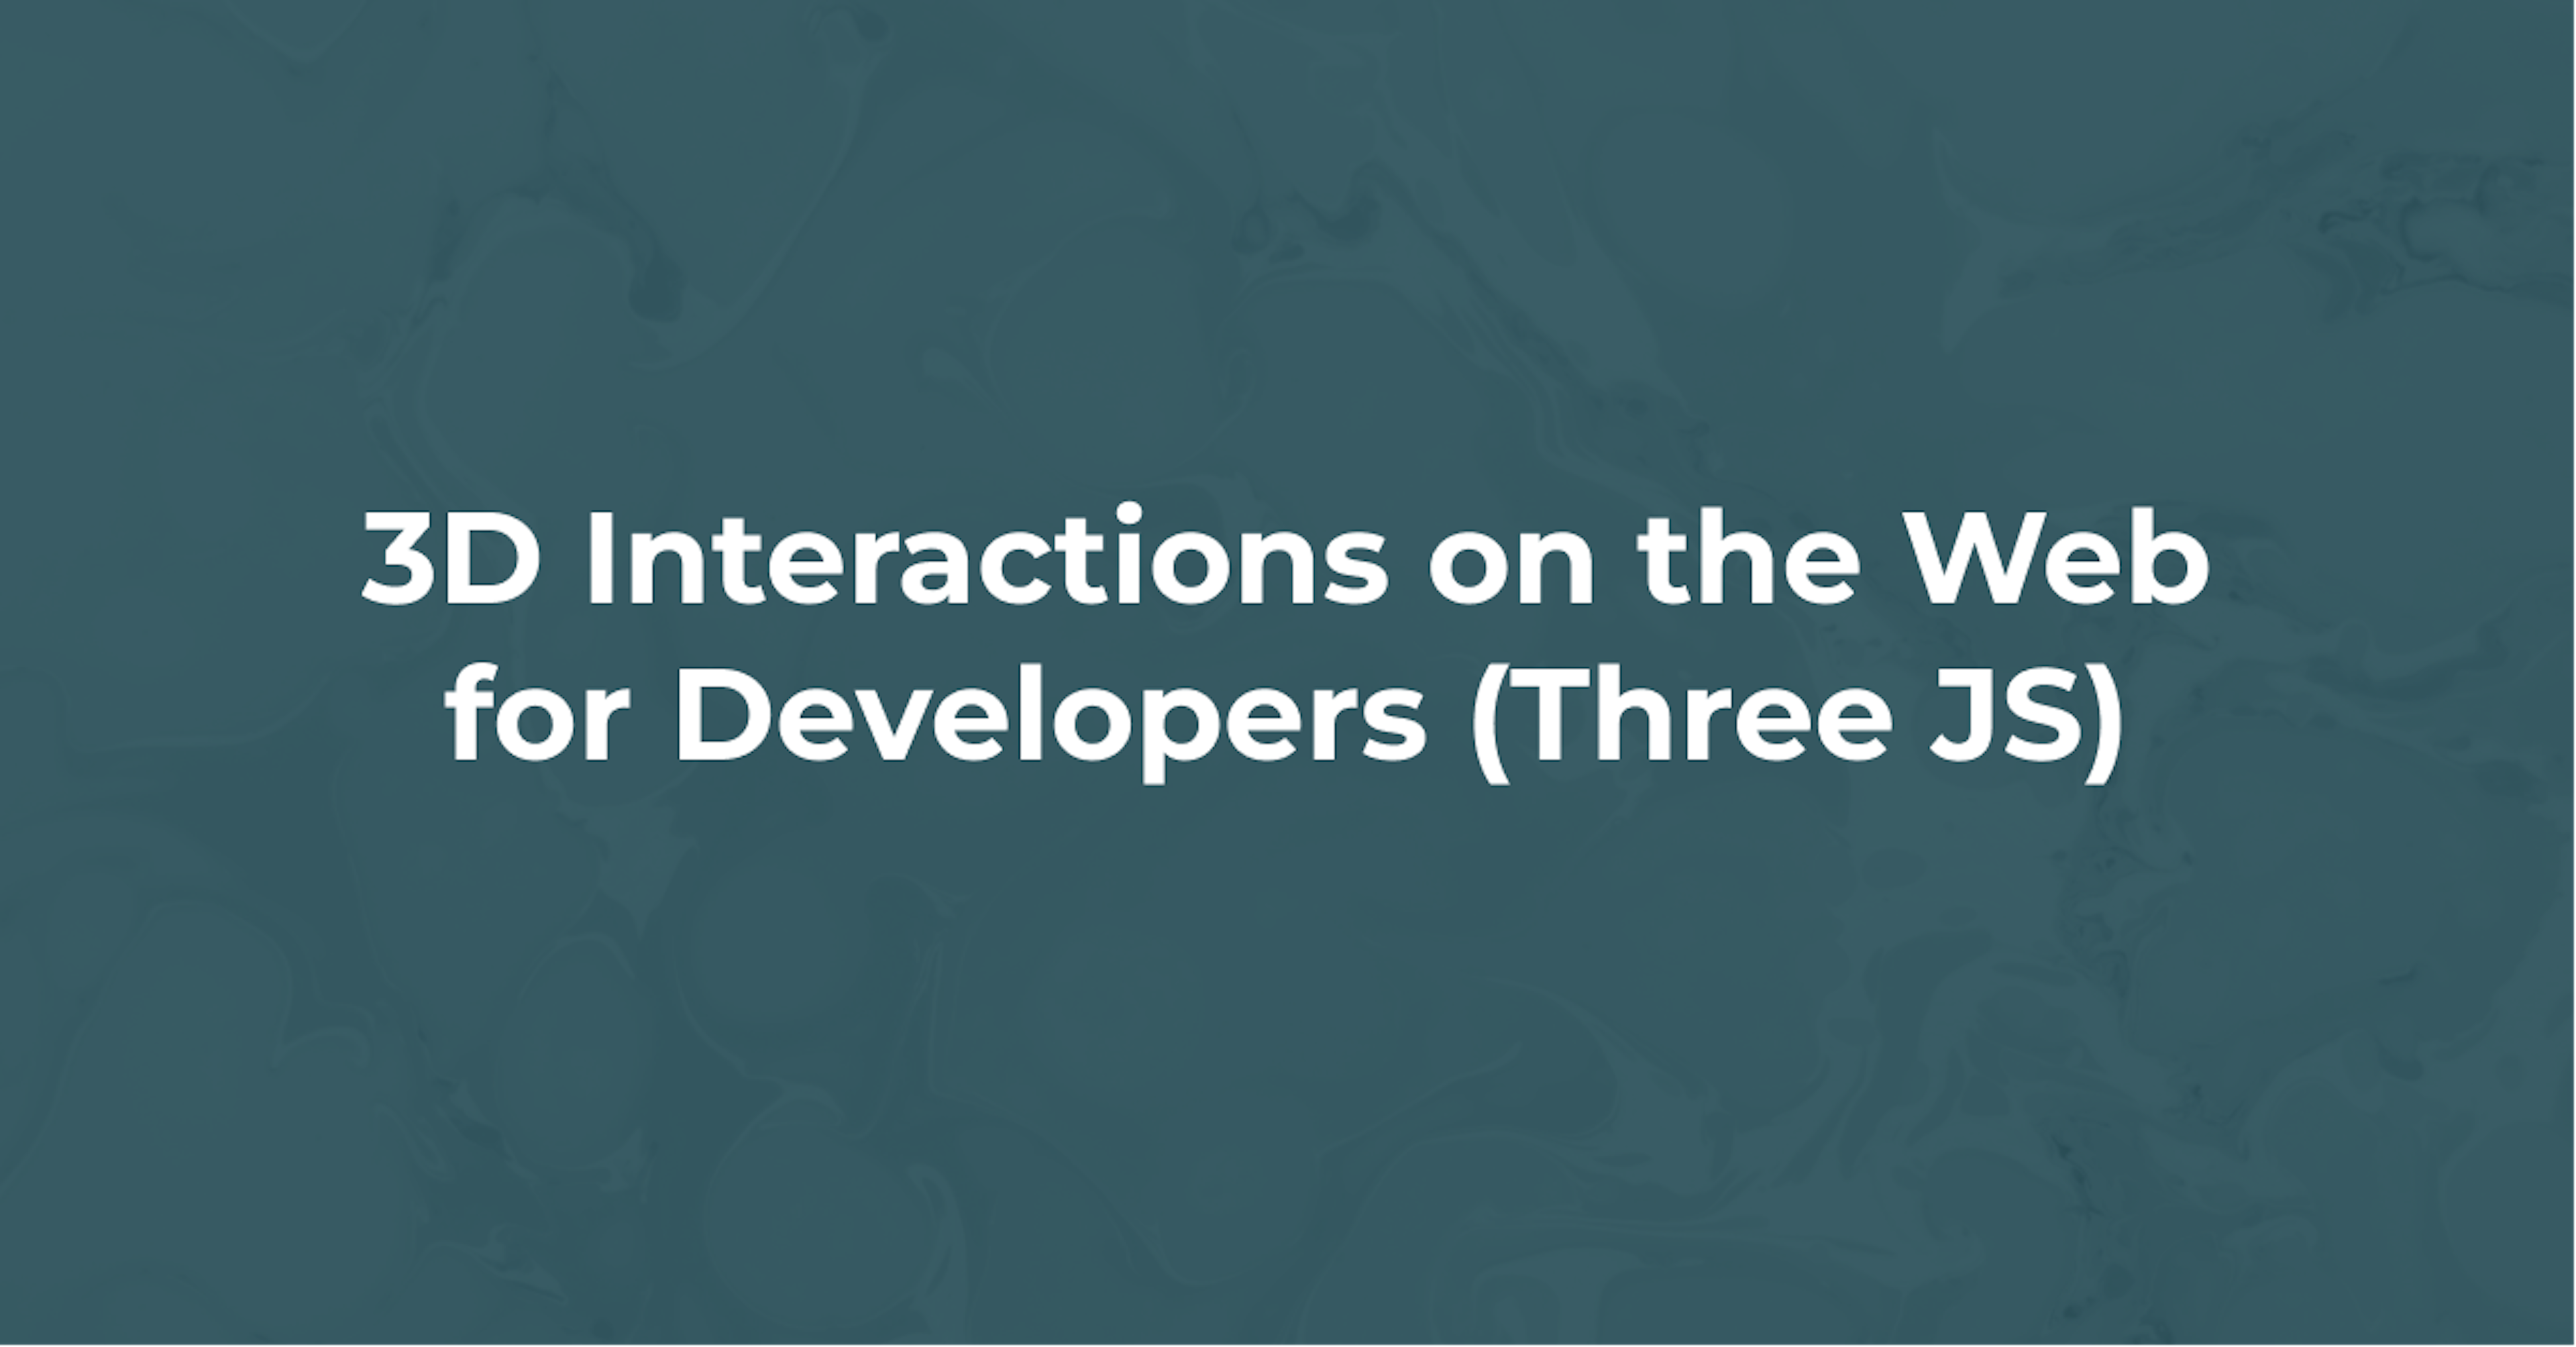 3D Interactions on the Web for Developers (Three JS)